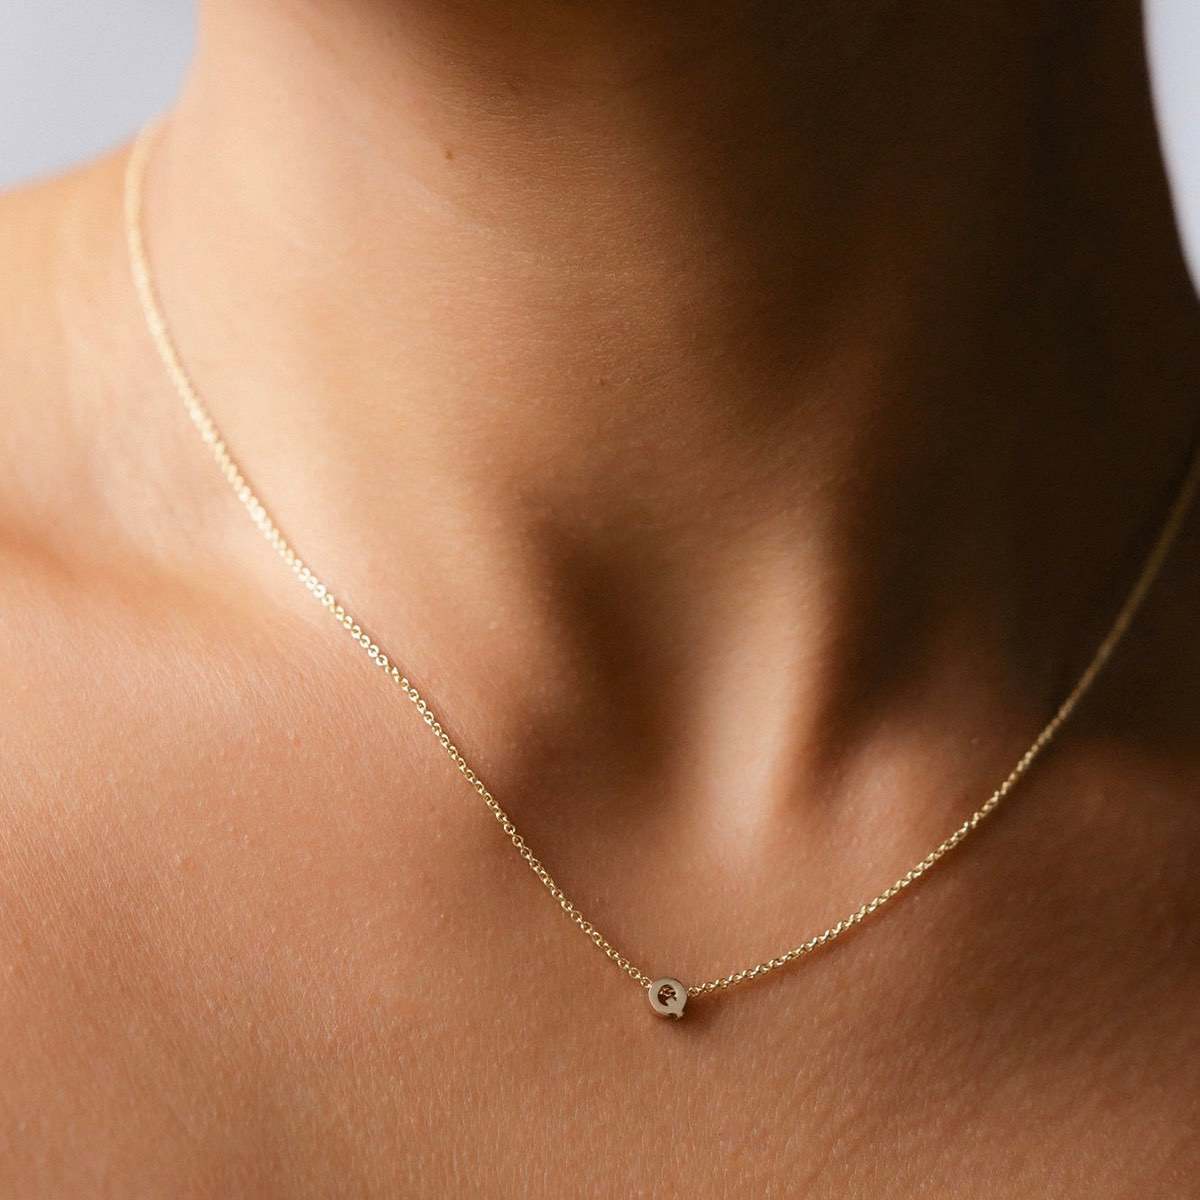 Hand finished solid gold letter necklace: Close up of a model wearing our beautiful 9ct yellow gold Tiny Letter Q Charm Necklace with a 40cm cable chain